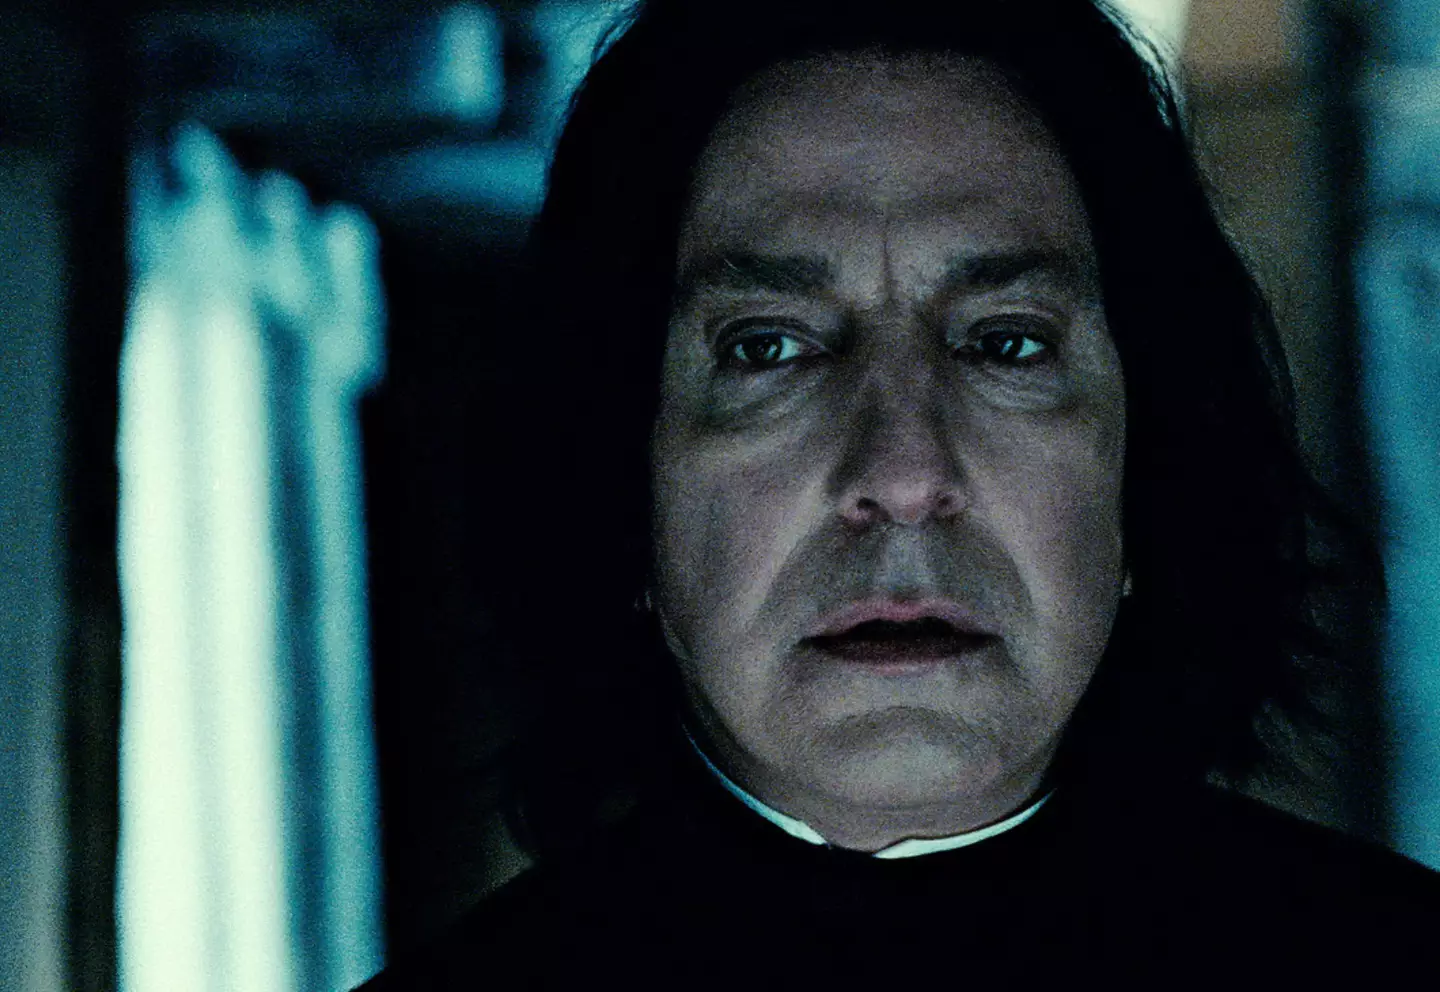 Snape died in the final Harry Potter film.